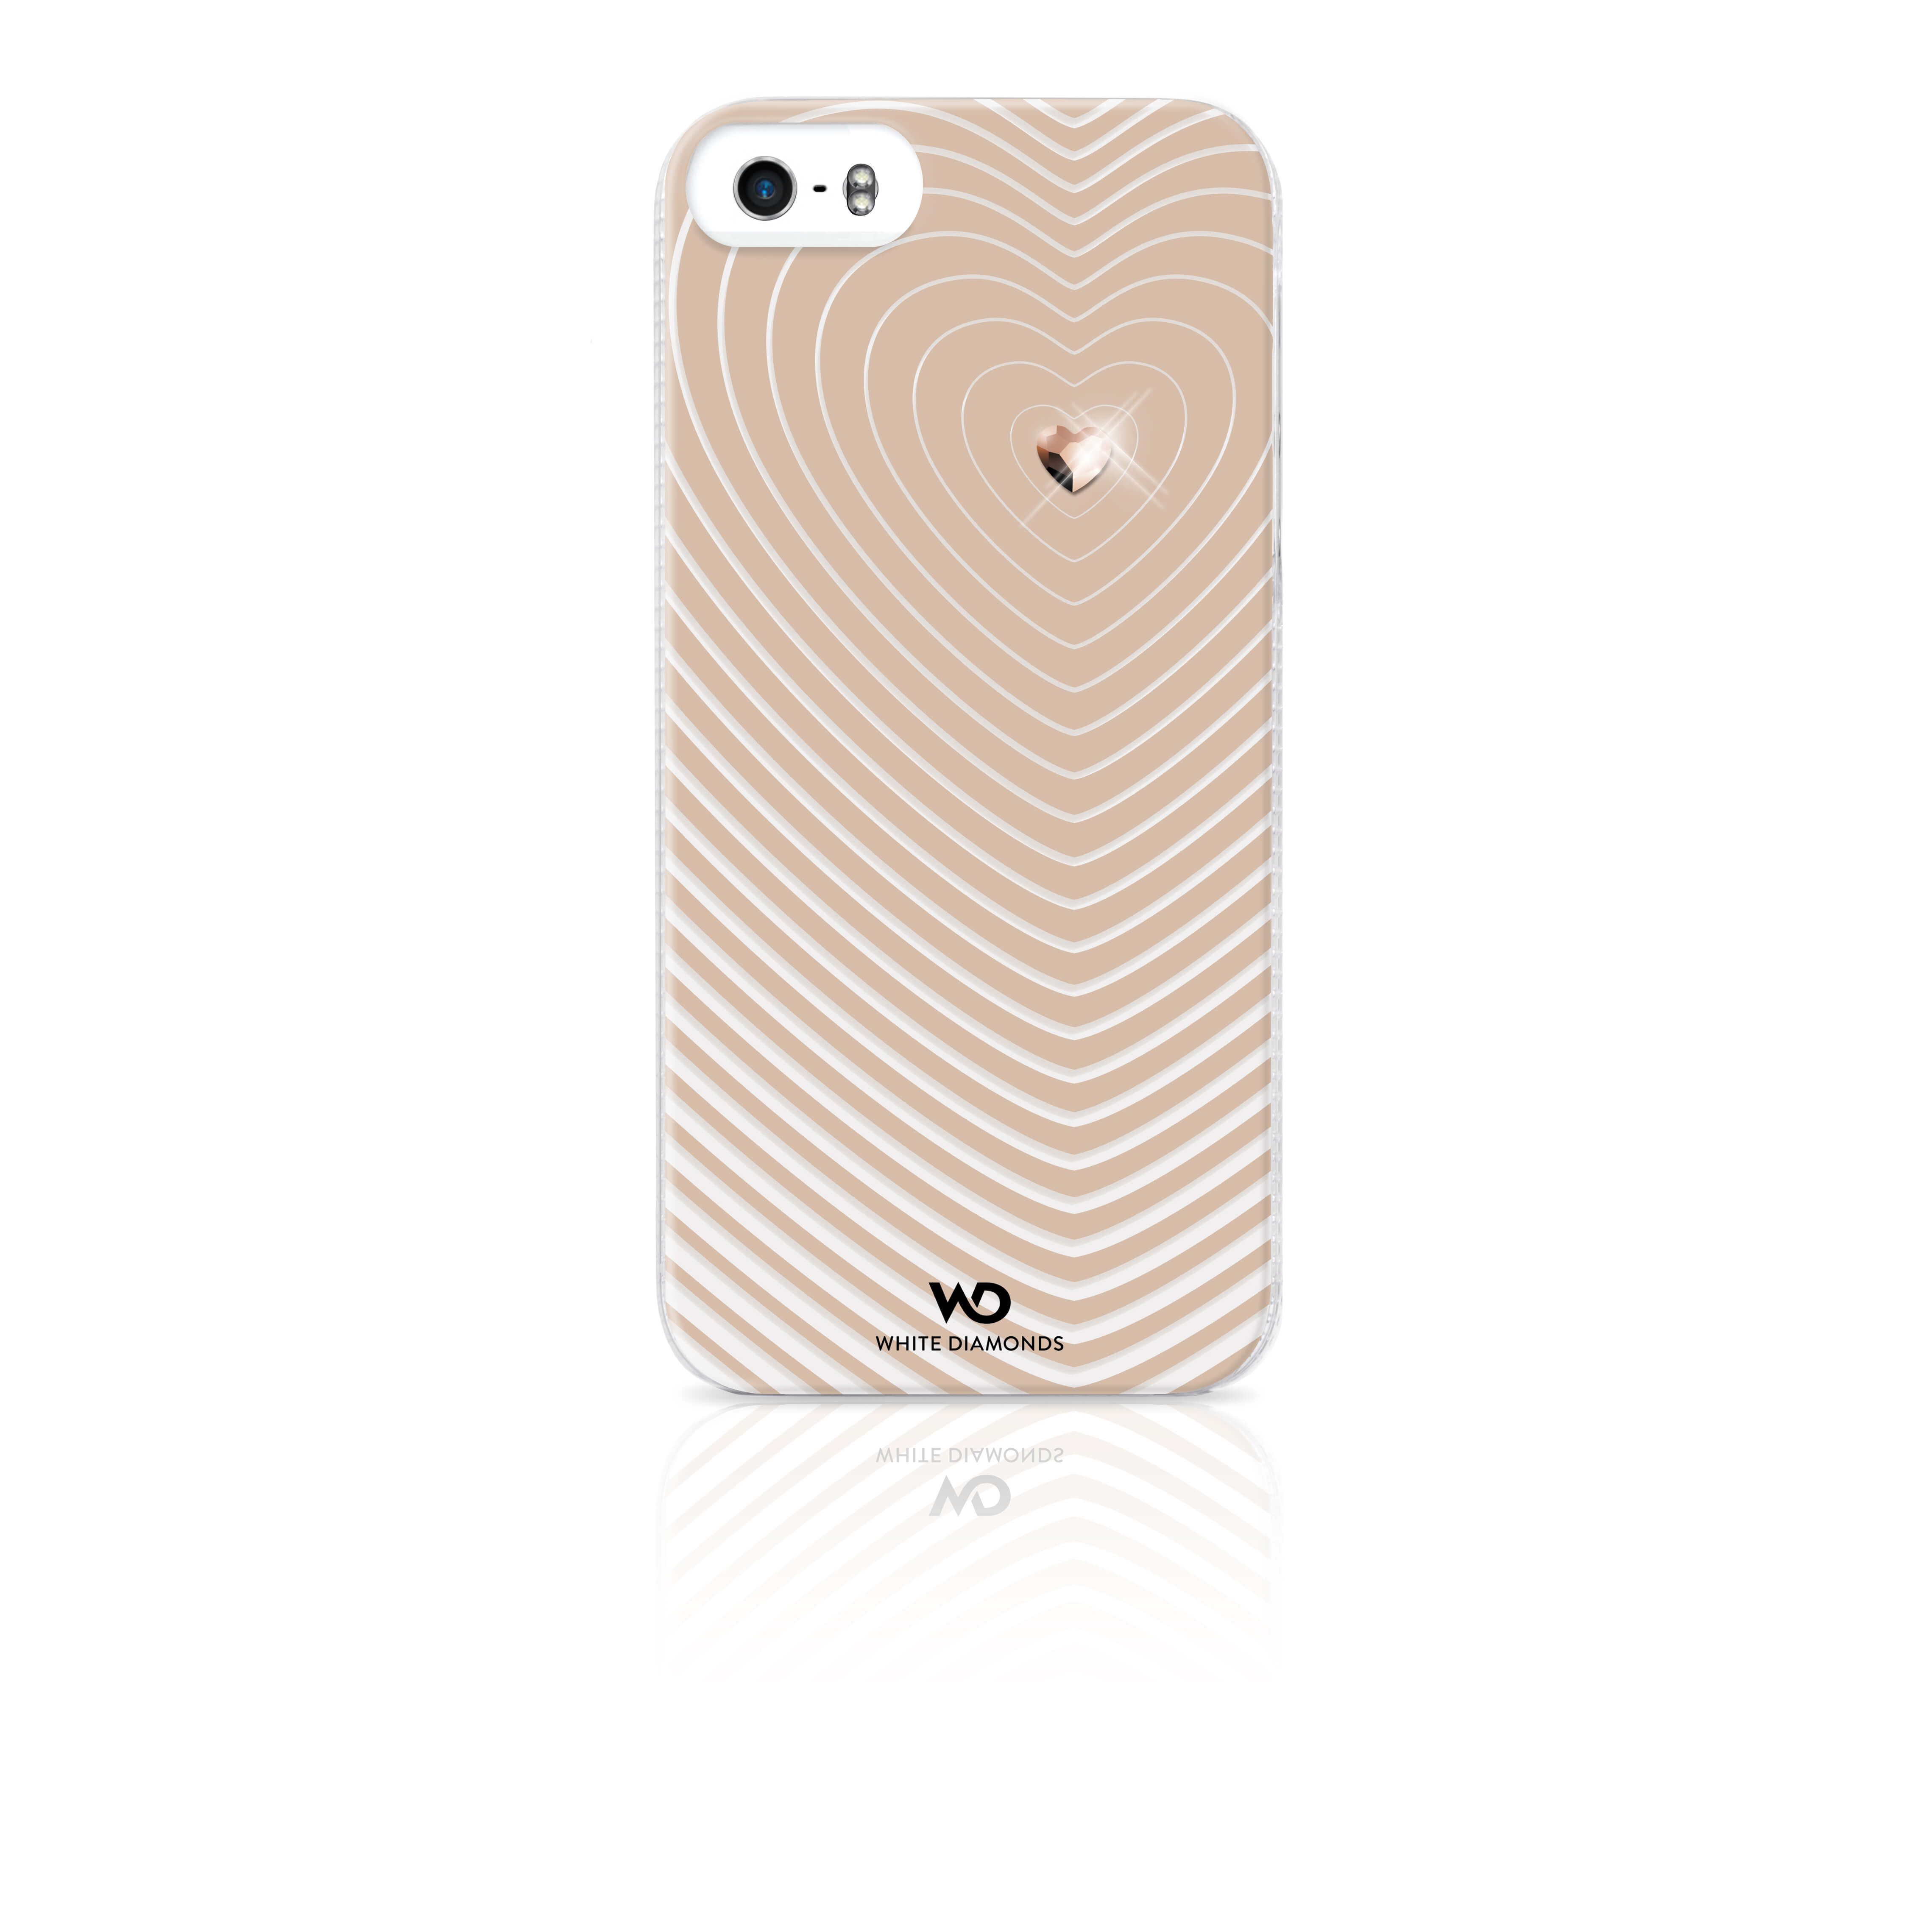 Heartbeat Mobile Phone Cover for Apple iPhone 5/5s, rose go